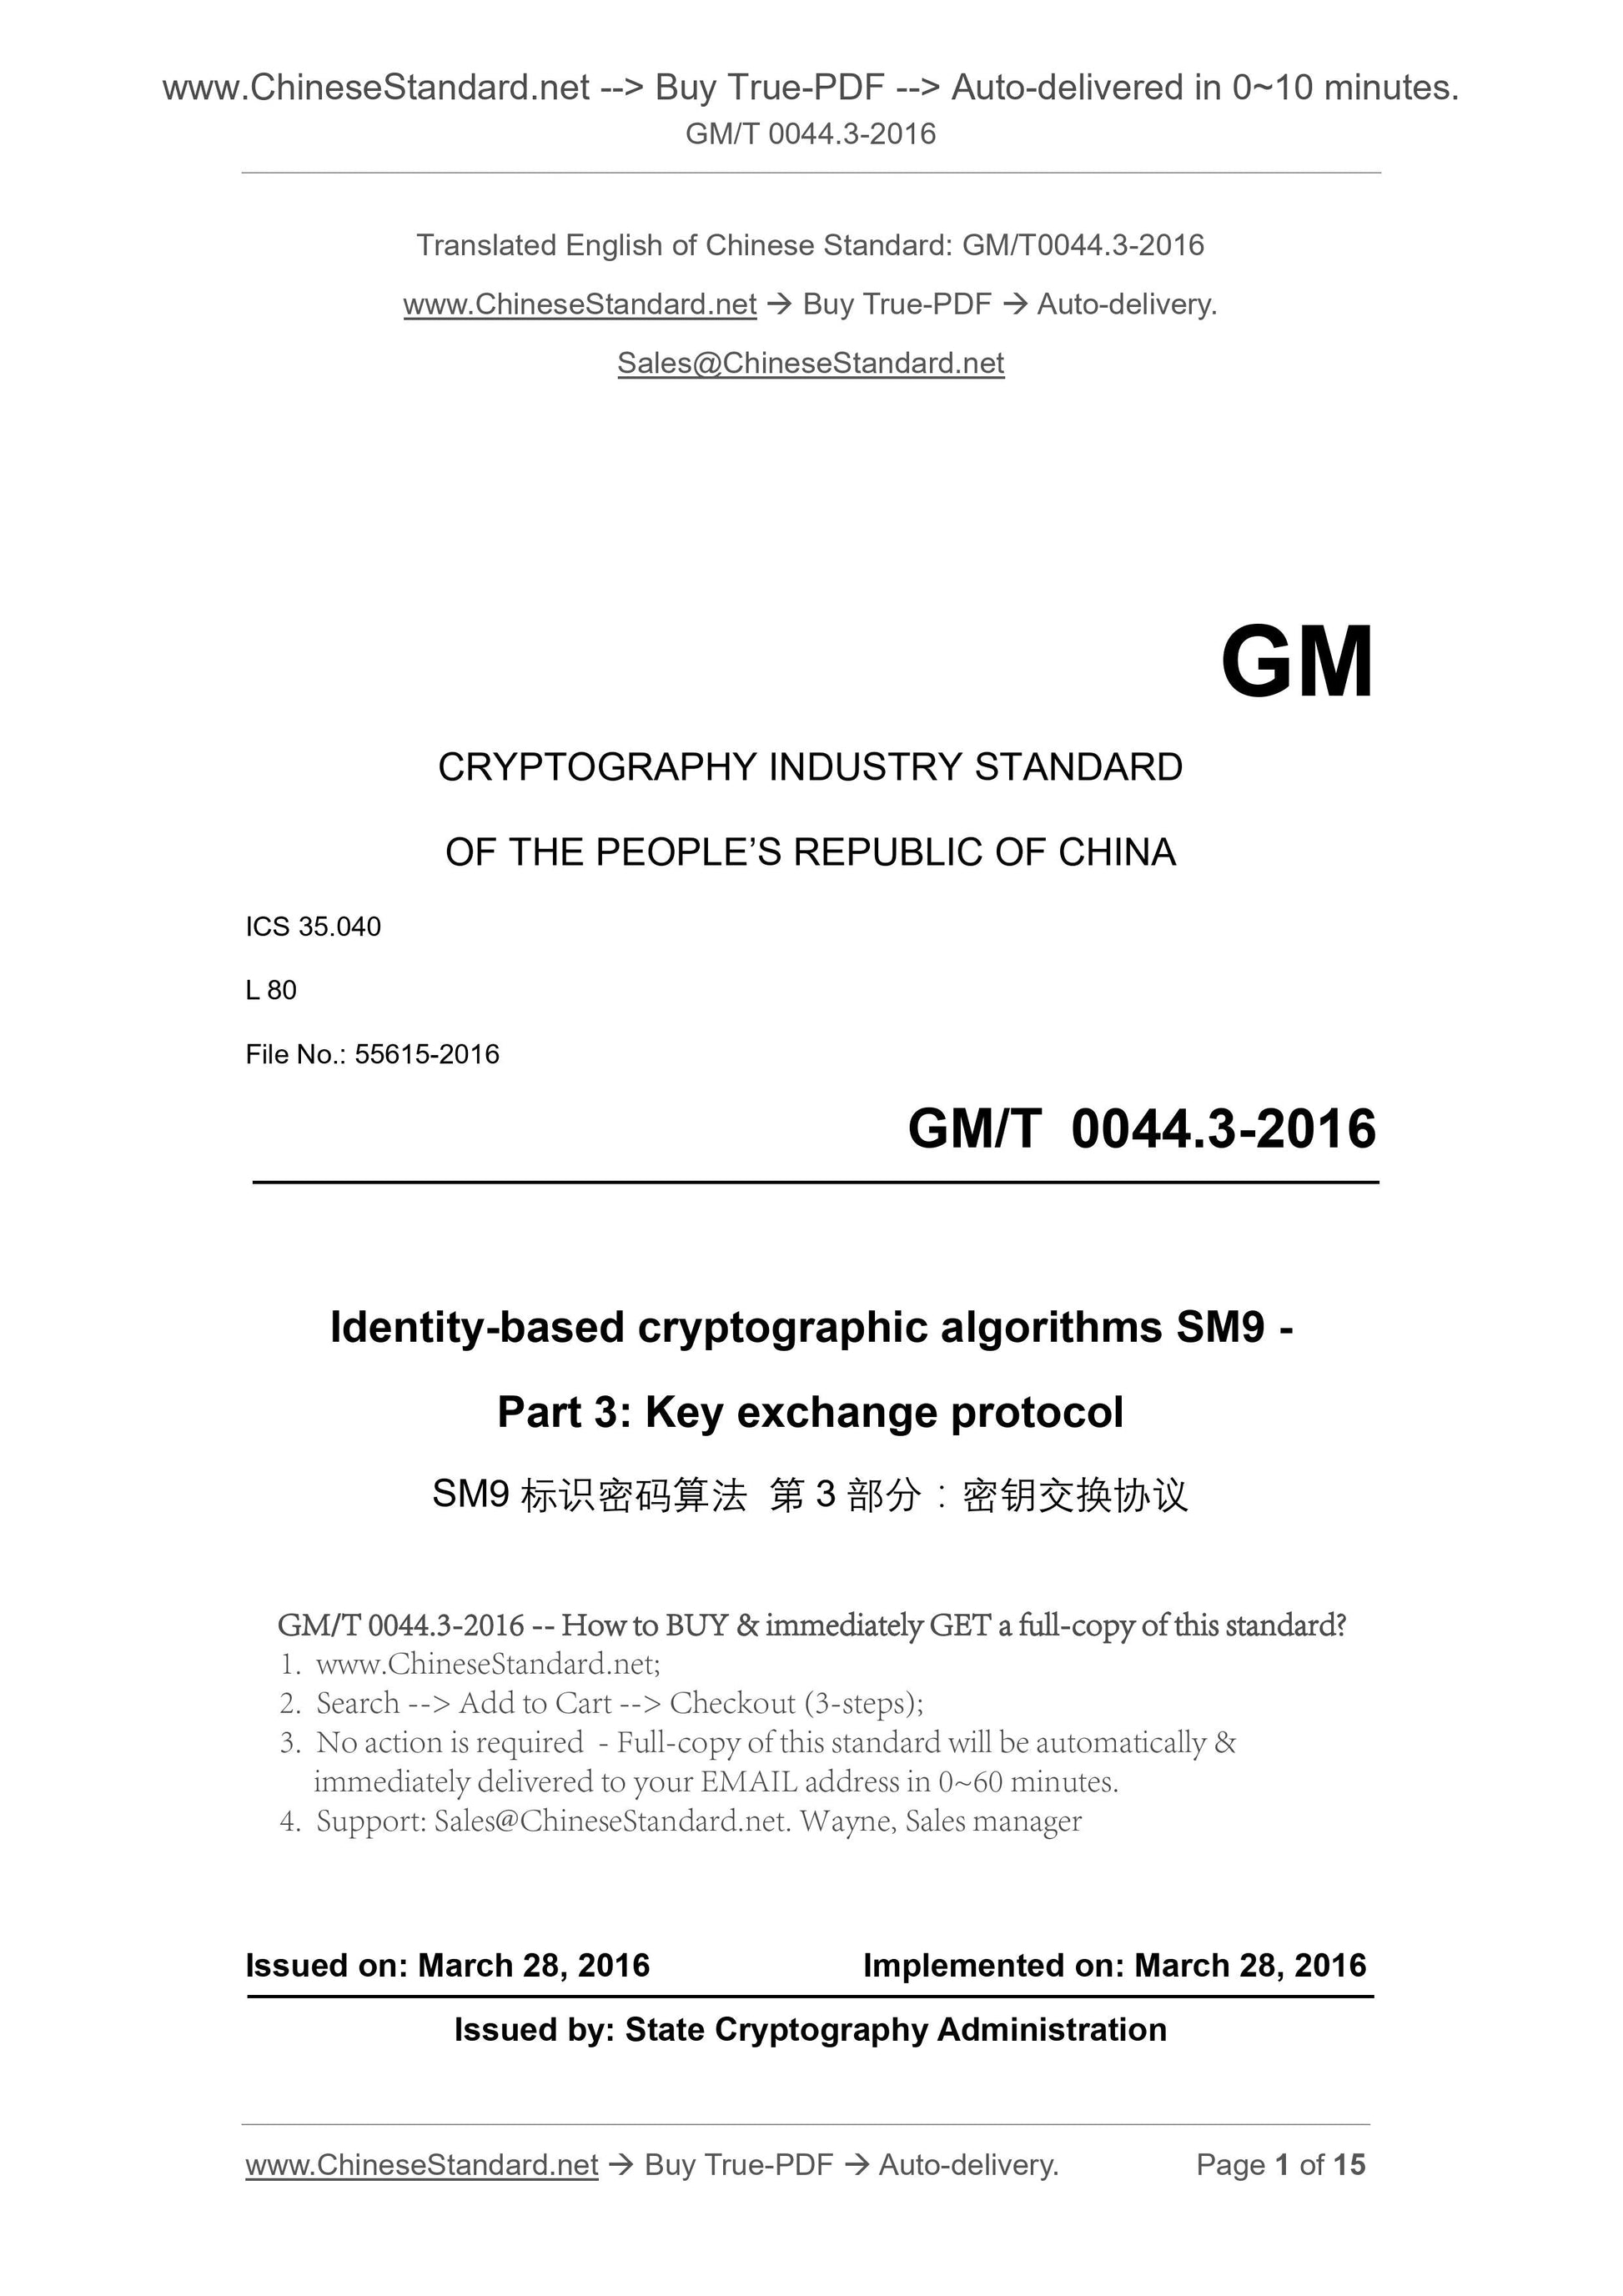 GM/T 0044.3-2016 Page 1